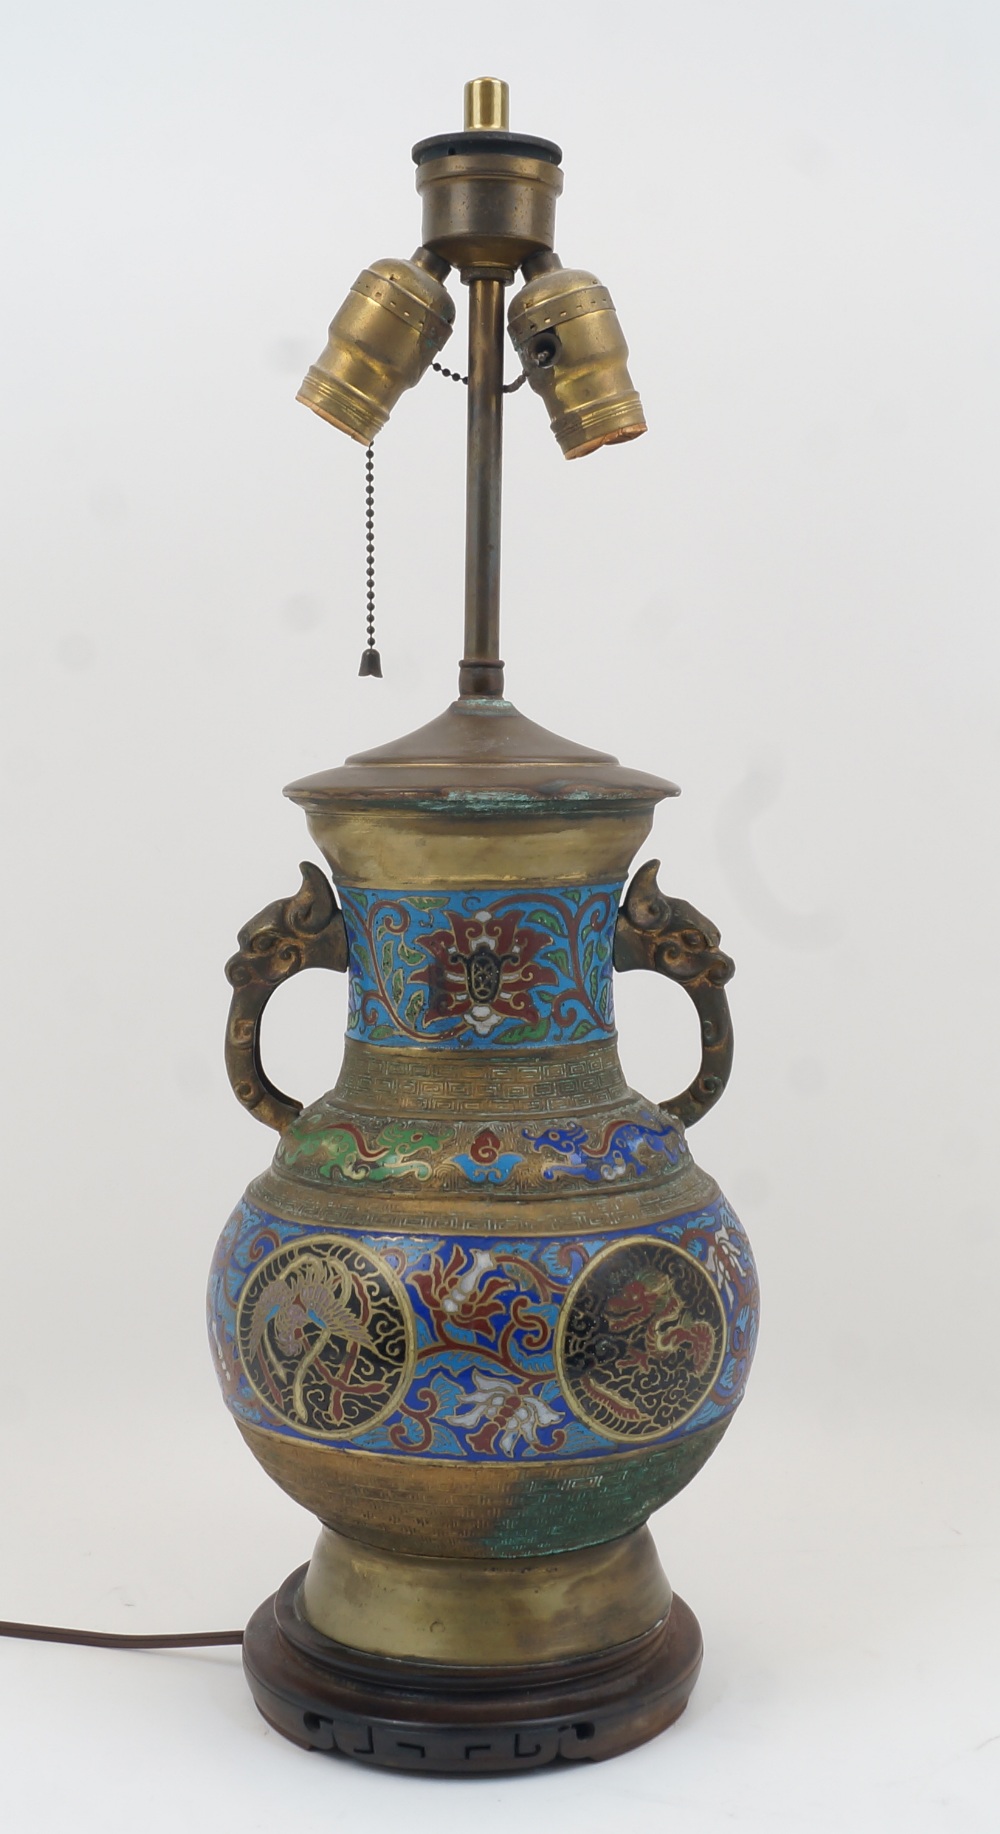 A Chinese cloisonne twin handled lamp base, 20th century, the exterior with panels of foliate motifs